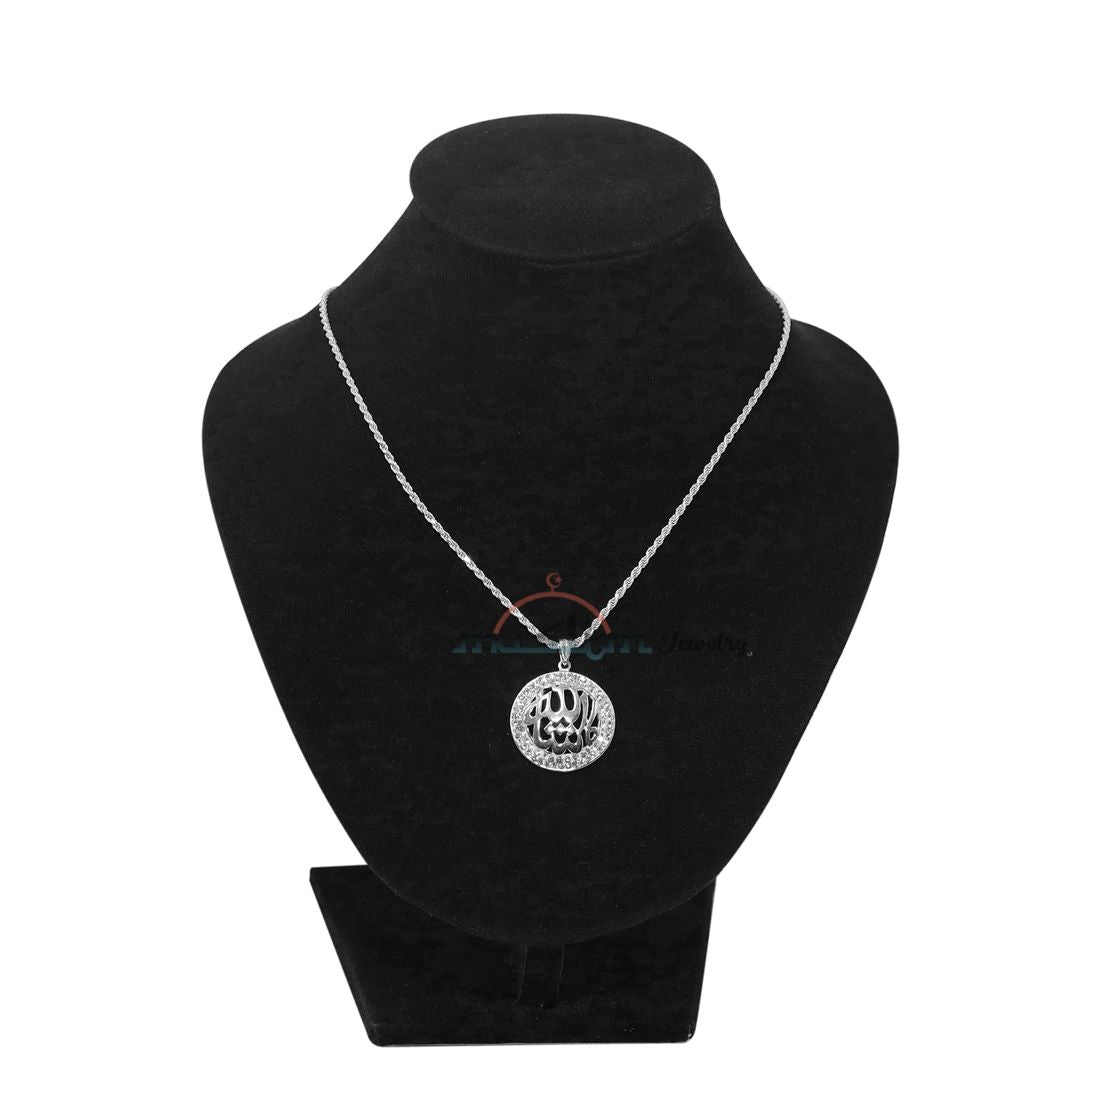 Small Islamic MashAllah Arabic Pendant with CZ Stone Bezel for Necklace or Chains